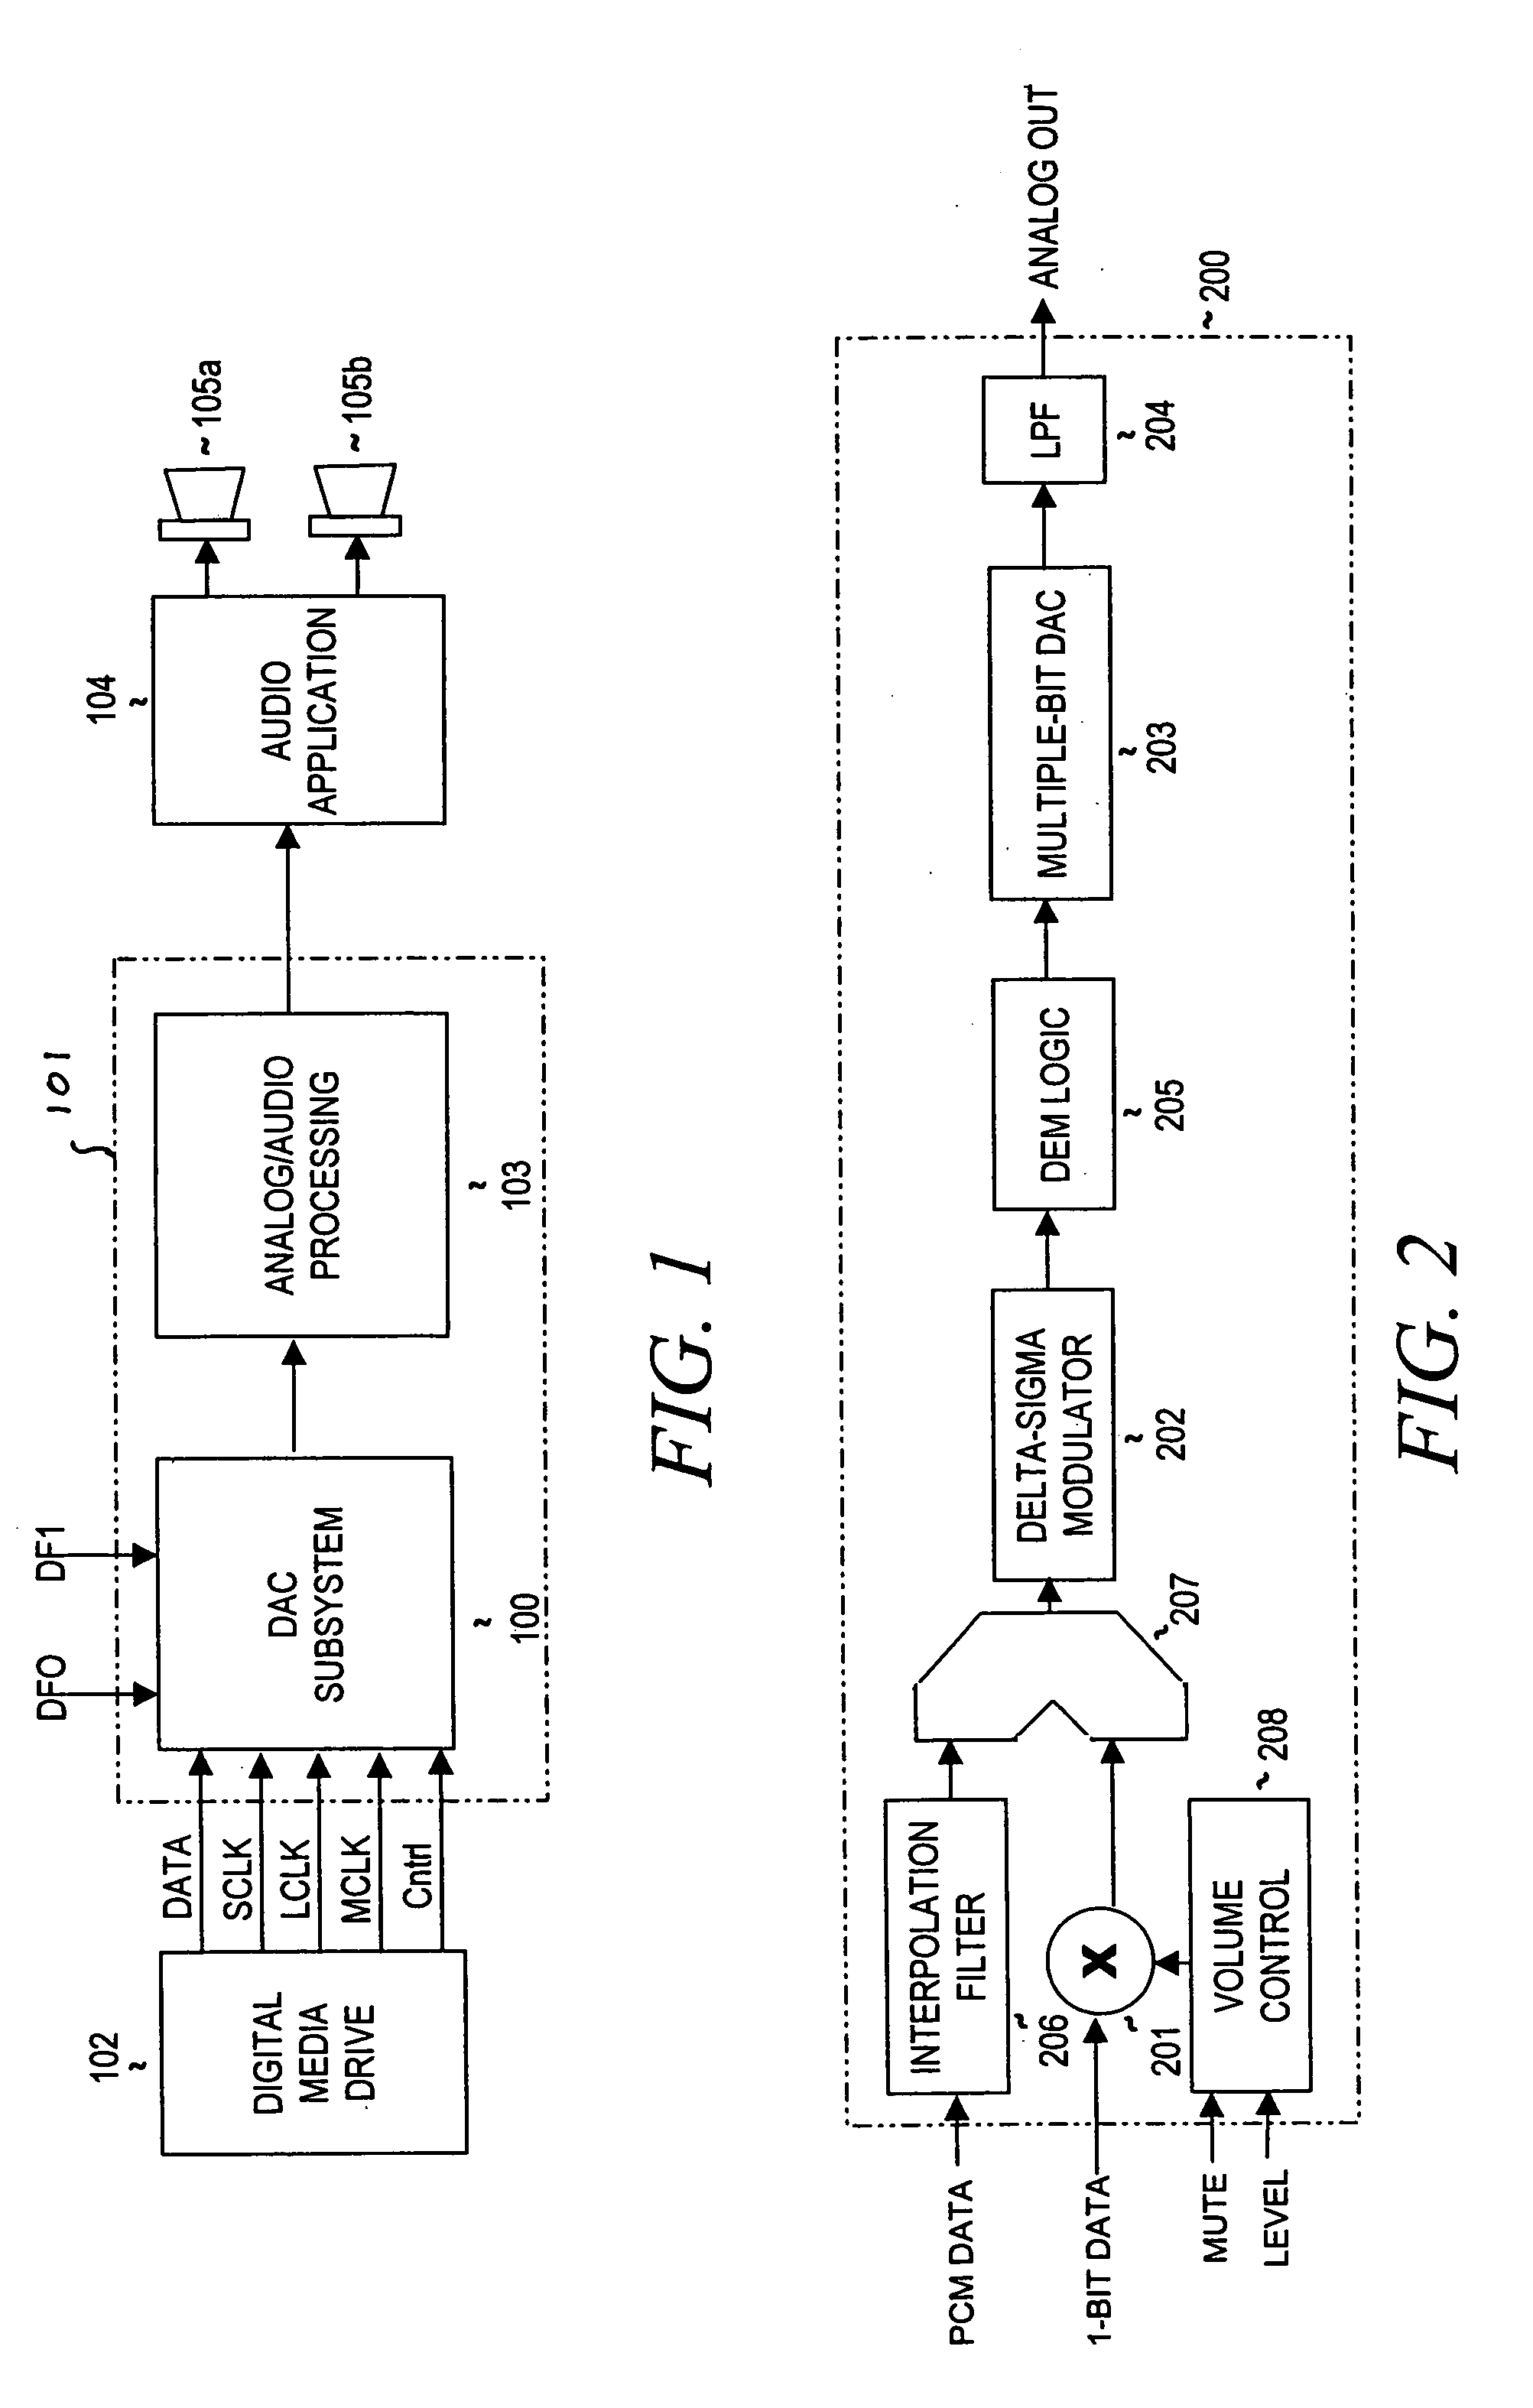 Feedback steering delta-sigma modulators and systems using the same